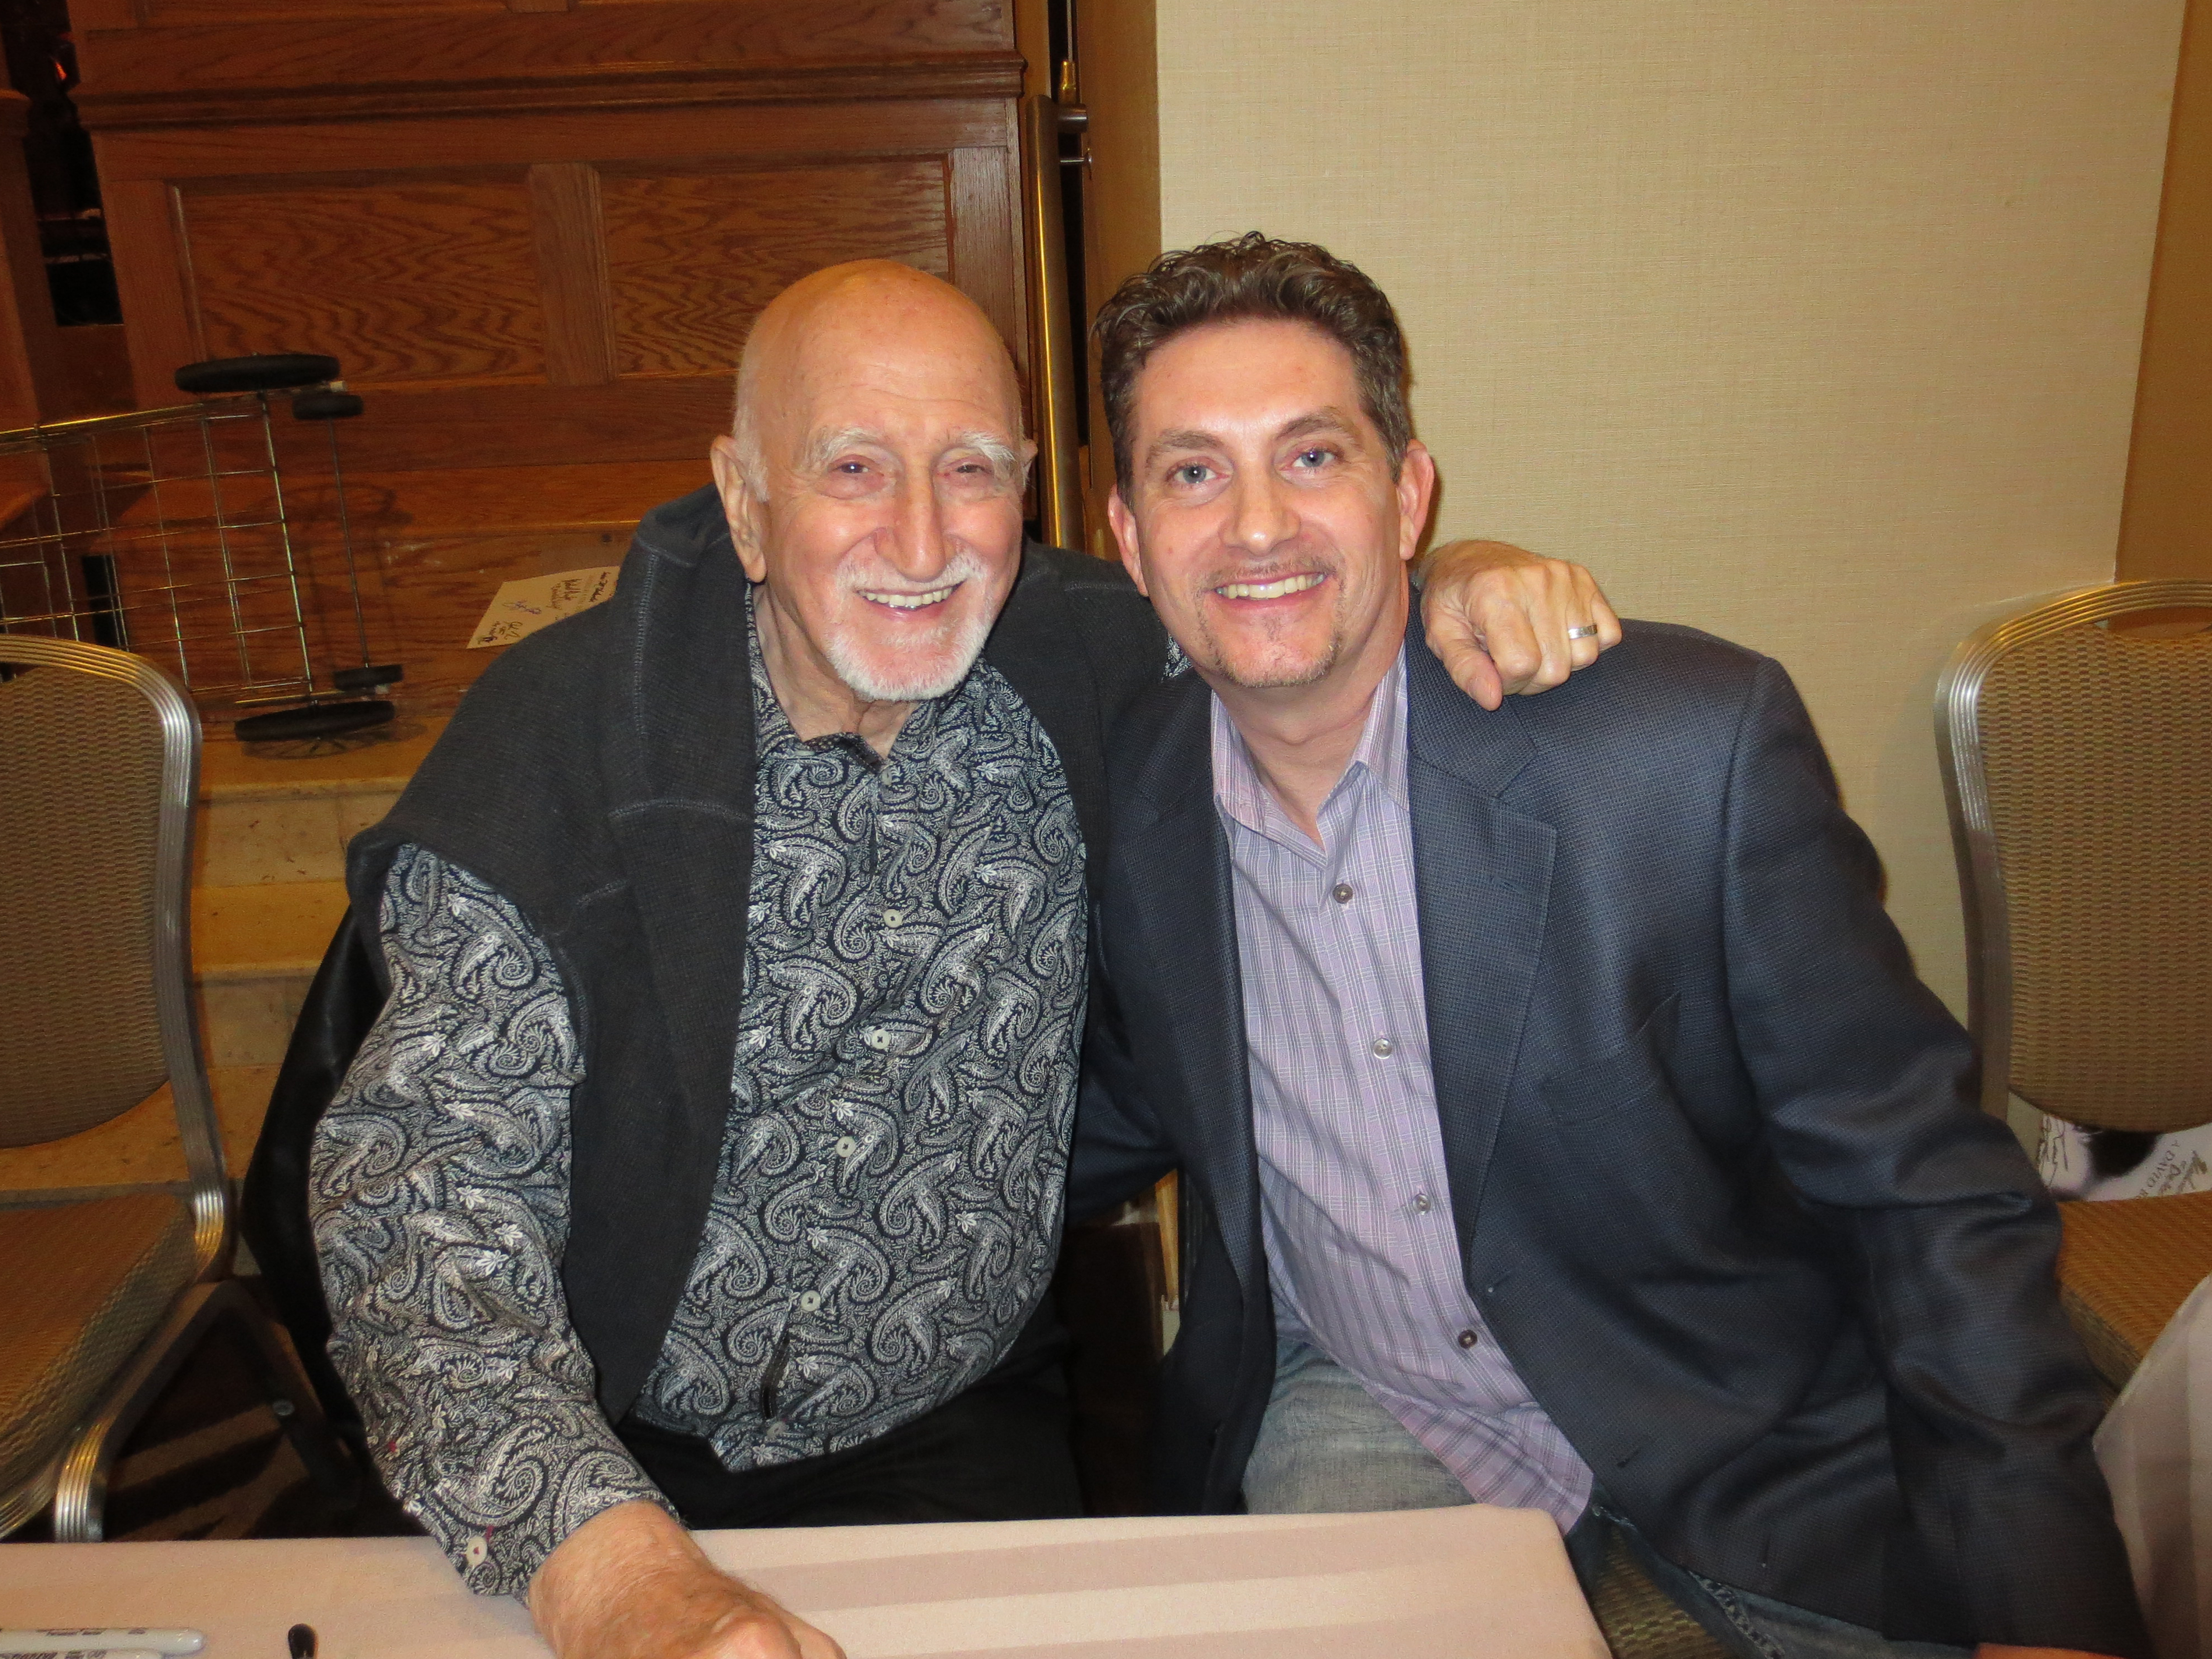 Sopranos and Godfather Two star Dominic Chianese and friend actor Michael Christaldi.